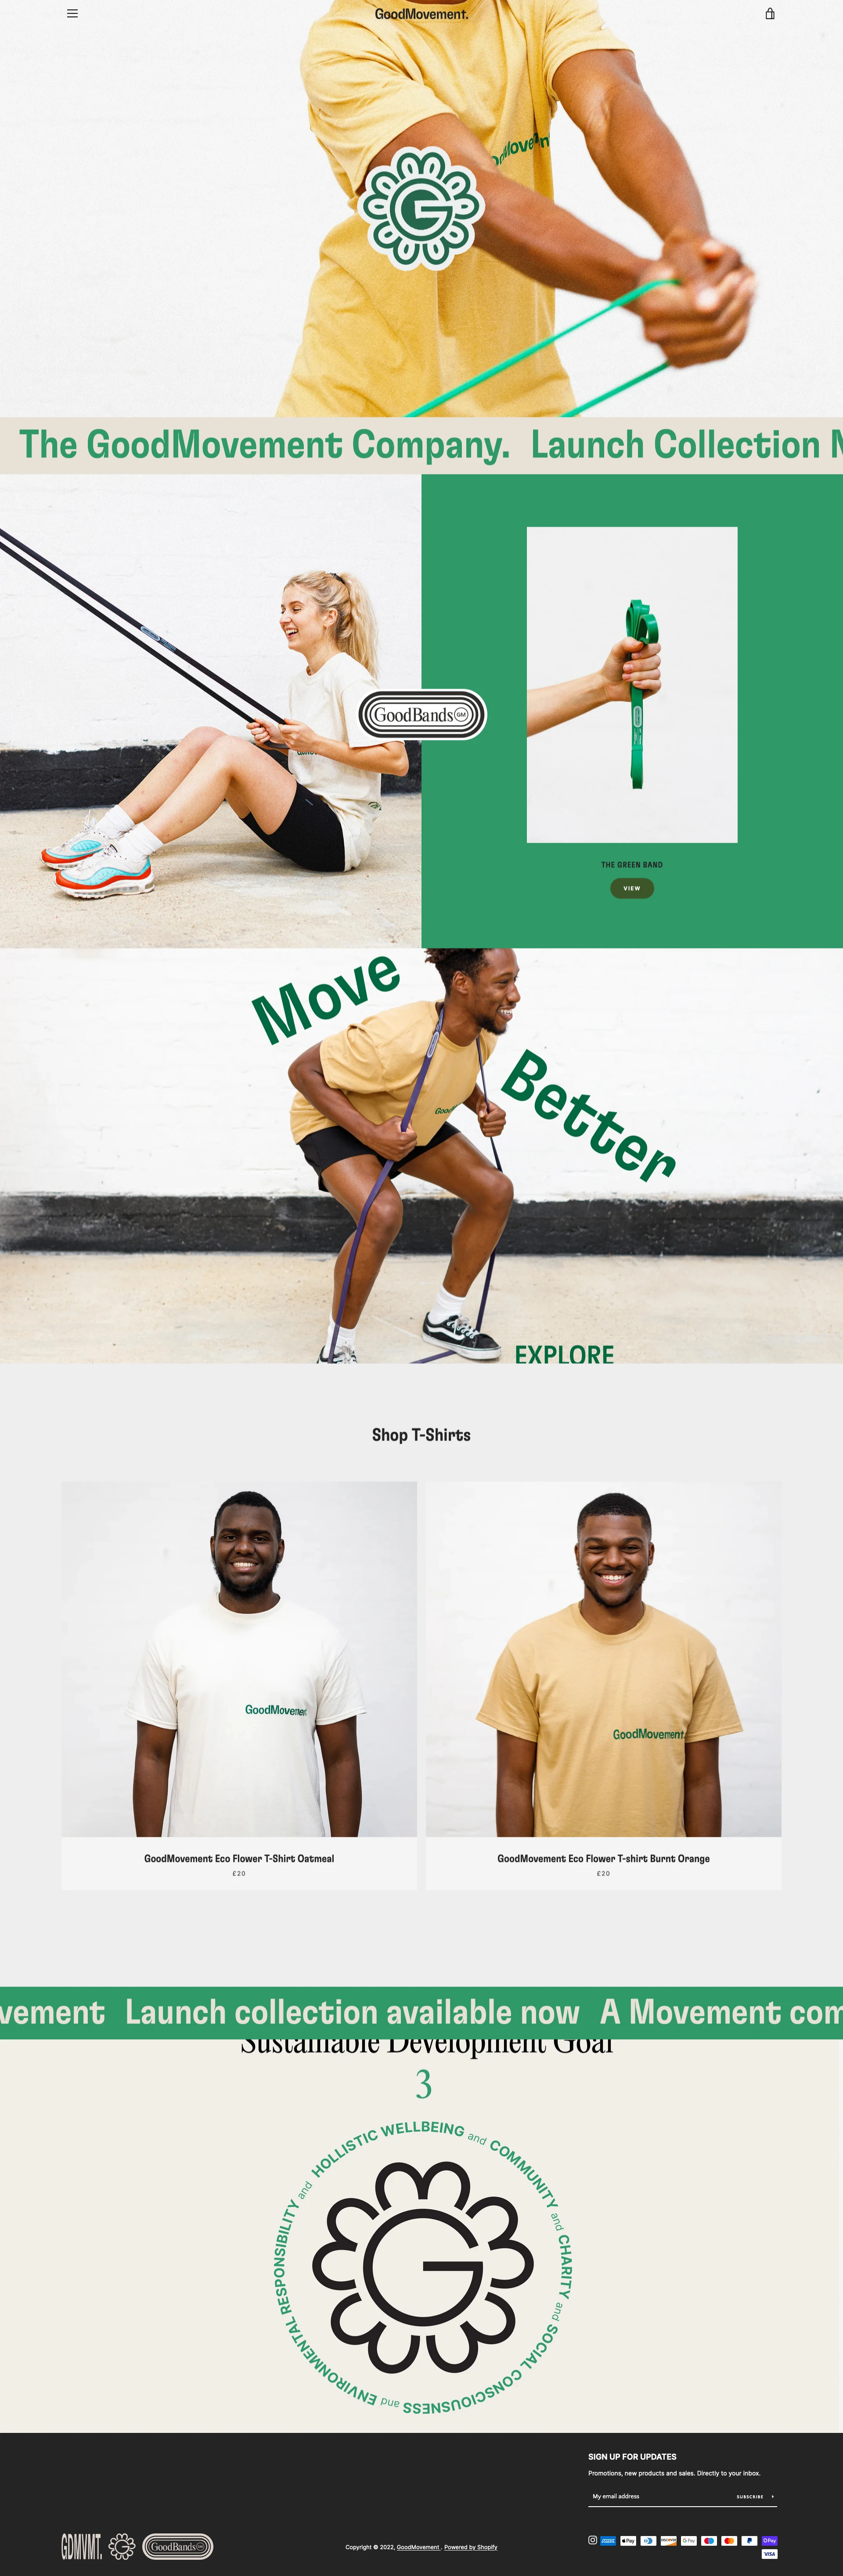 GoodMovement Landing Page Example: GoodMovement lifestyle medicine brand. Launch collection now available selling GoodBands resistance bands and Promotional Eco Flower logo T- shirts. On a mission to make the world a happier and healthier place through movement.